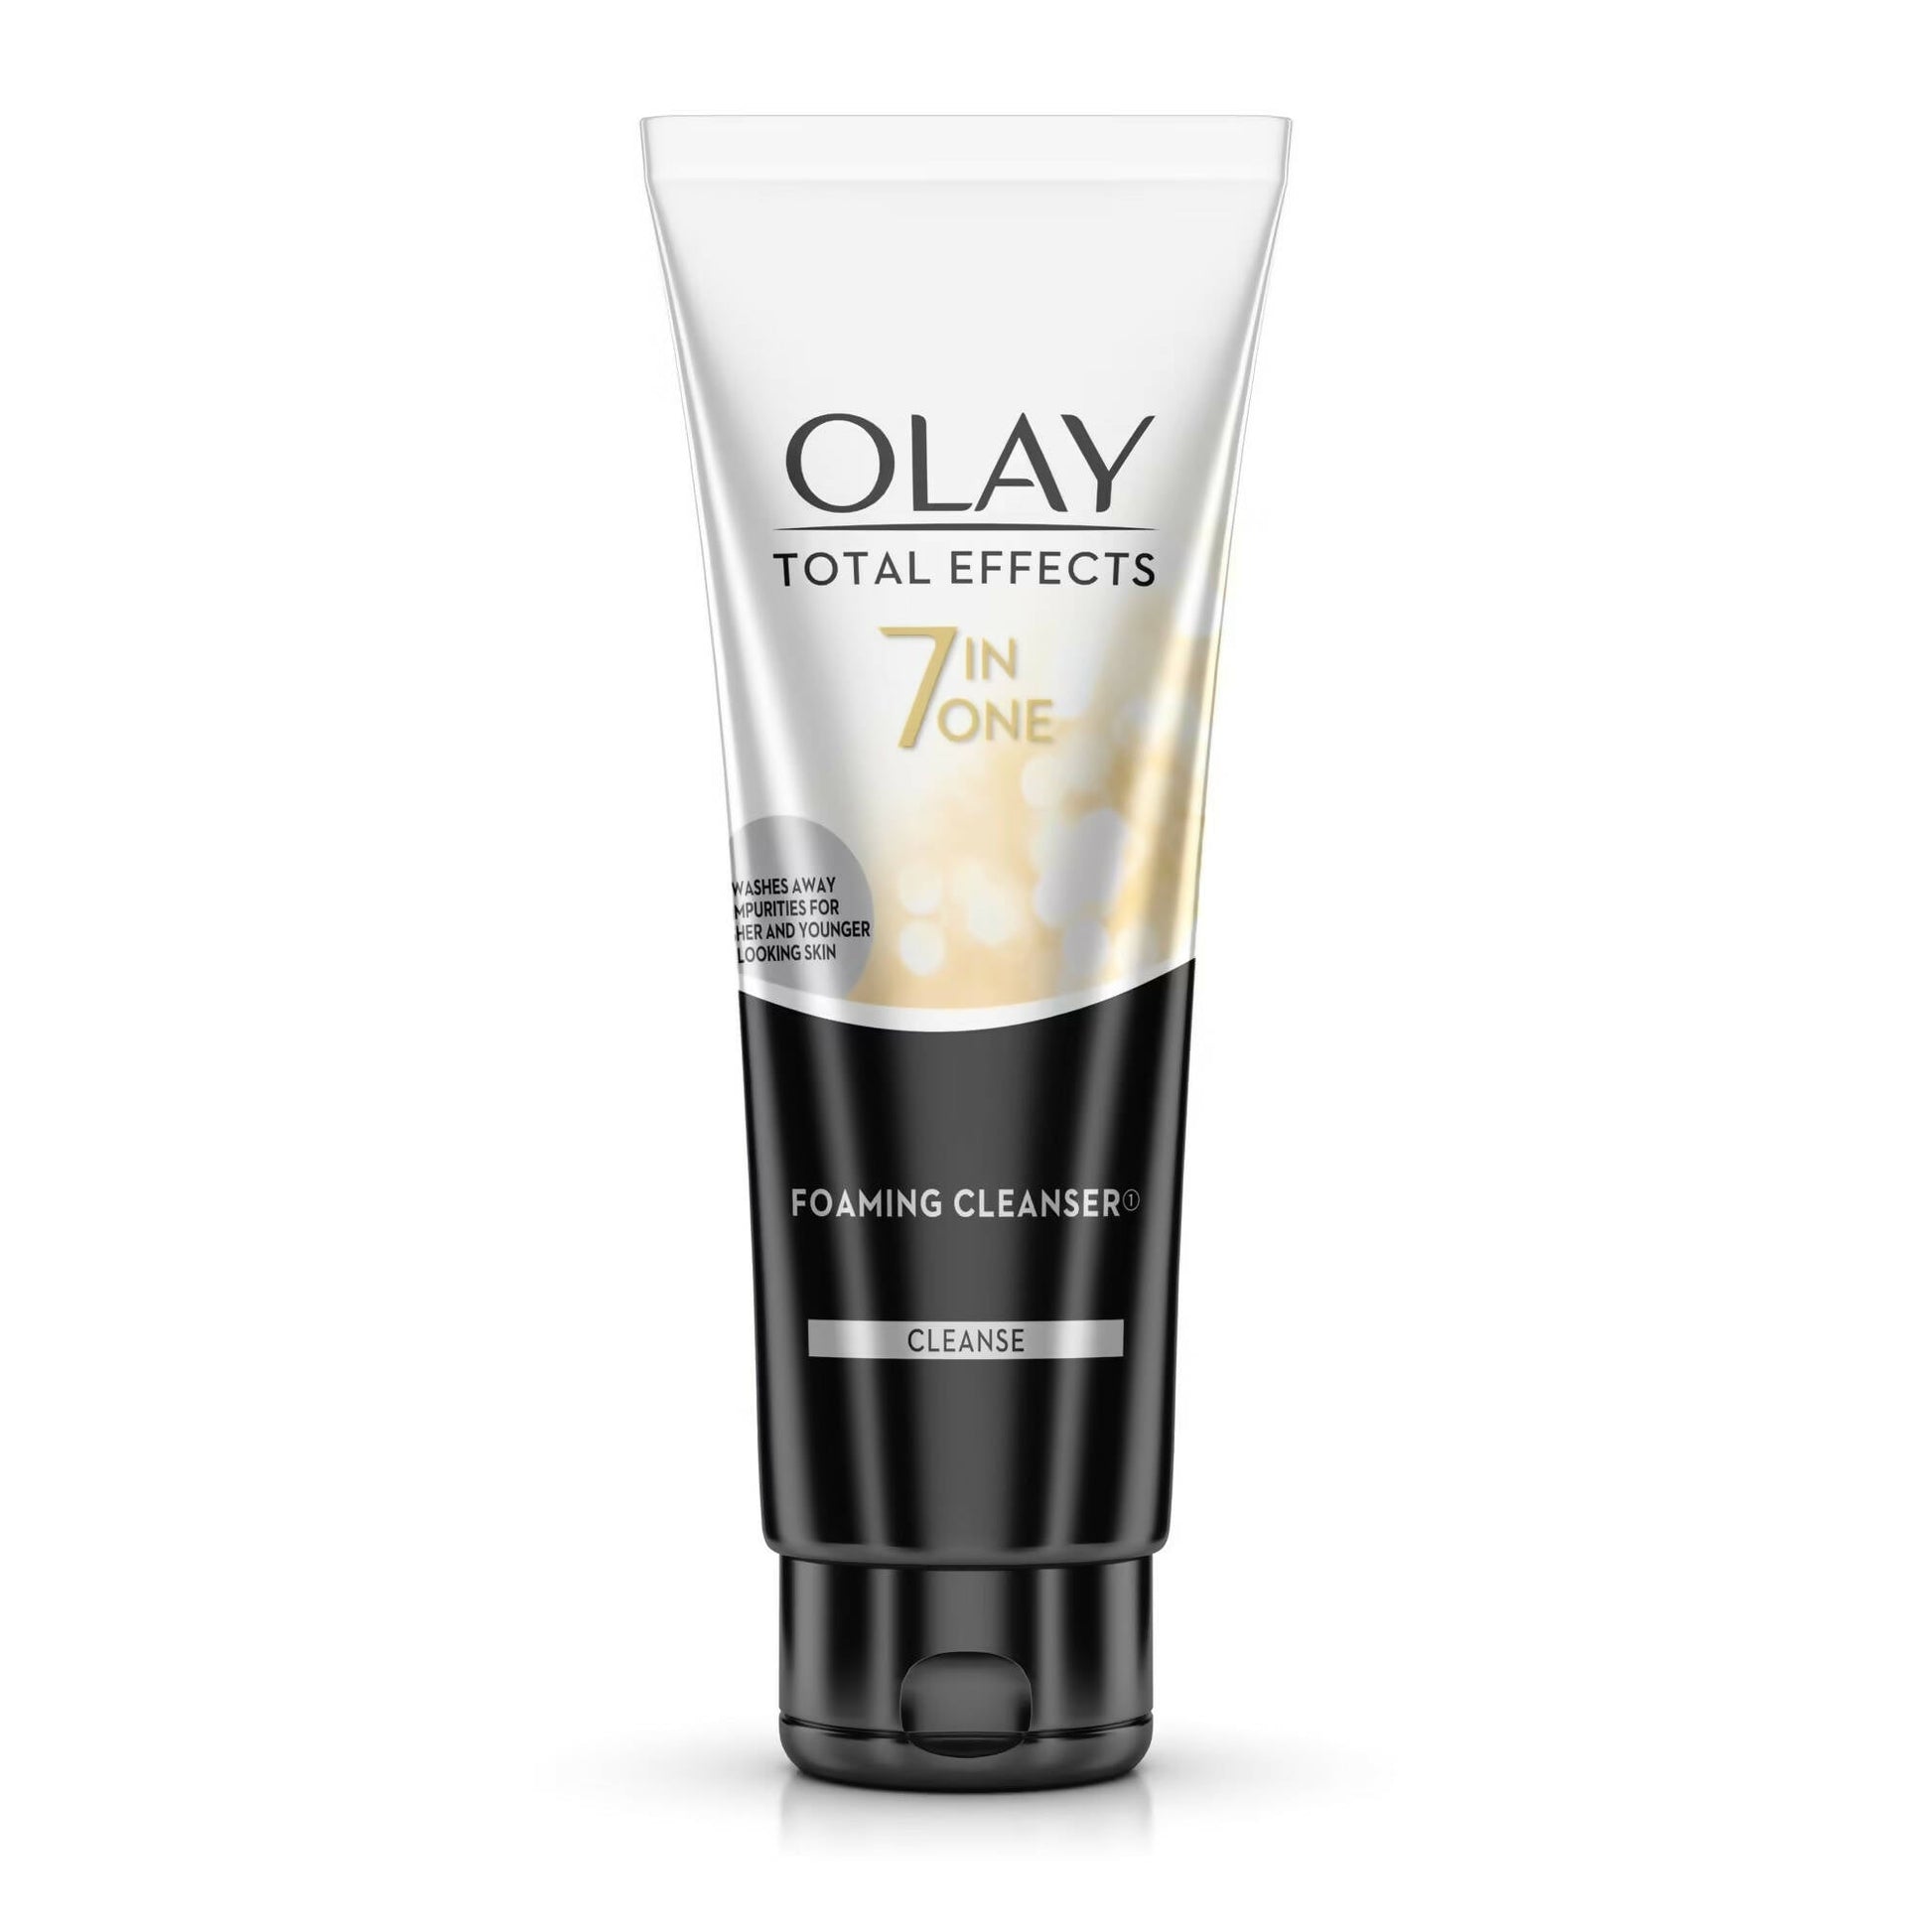 Olay Total Effects 7 In One Foaming Cleanser - BUDNEN